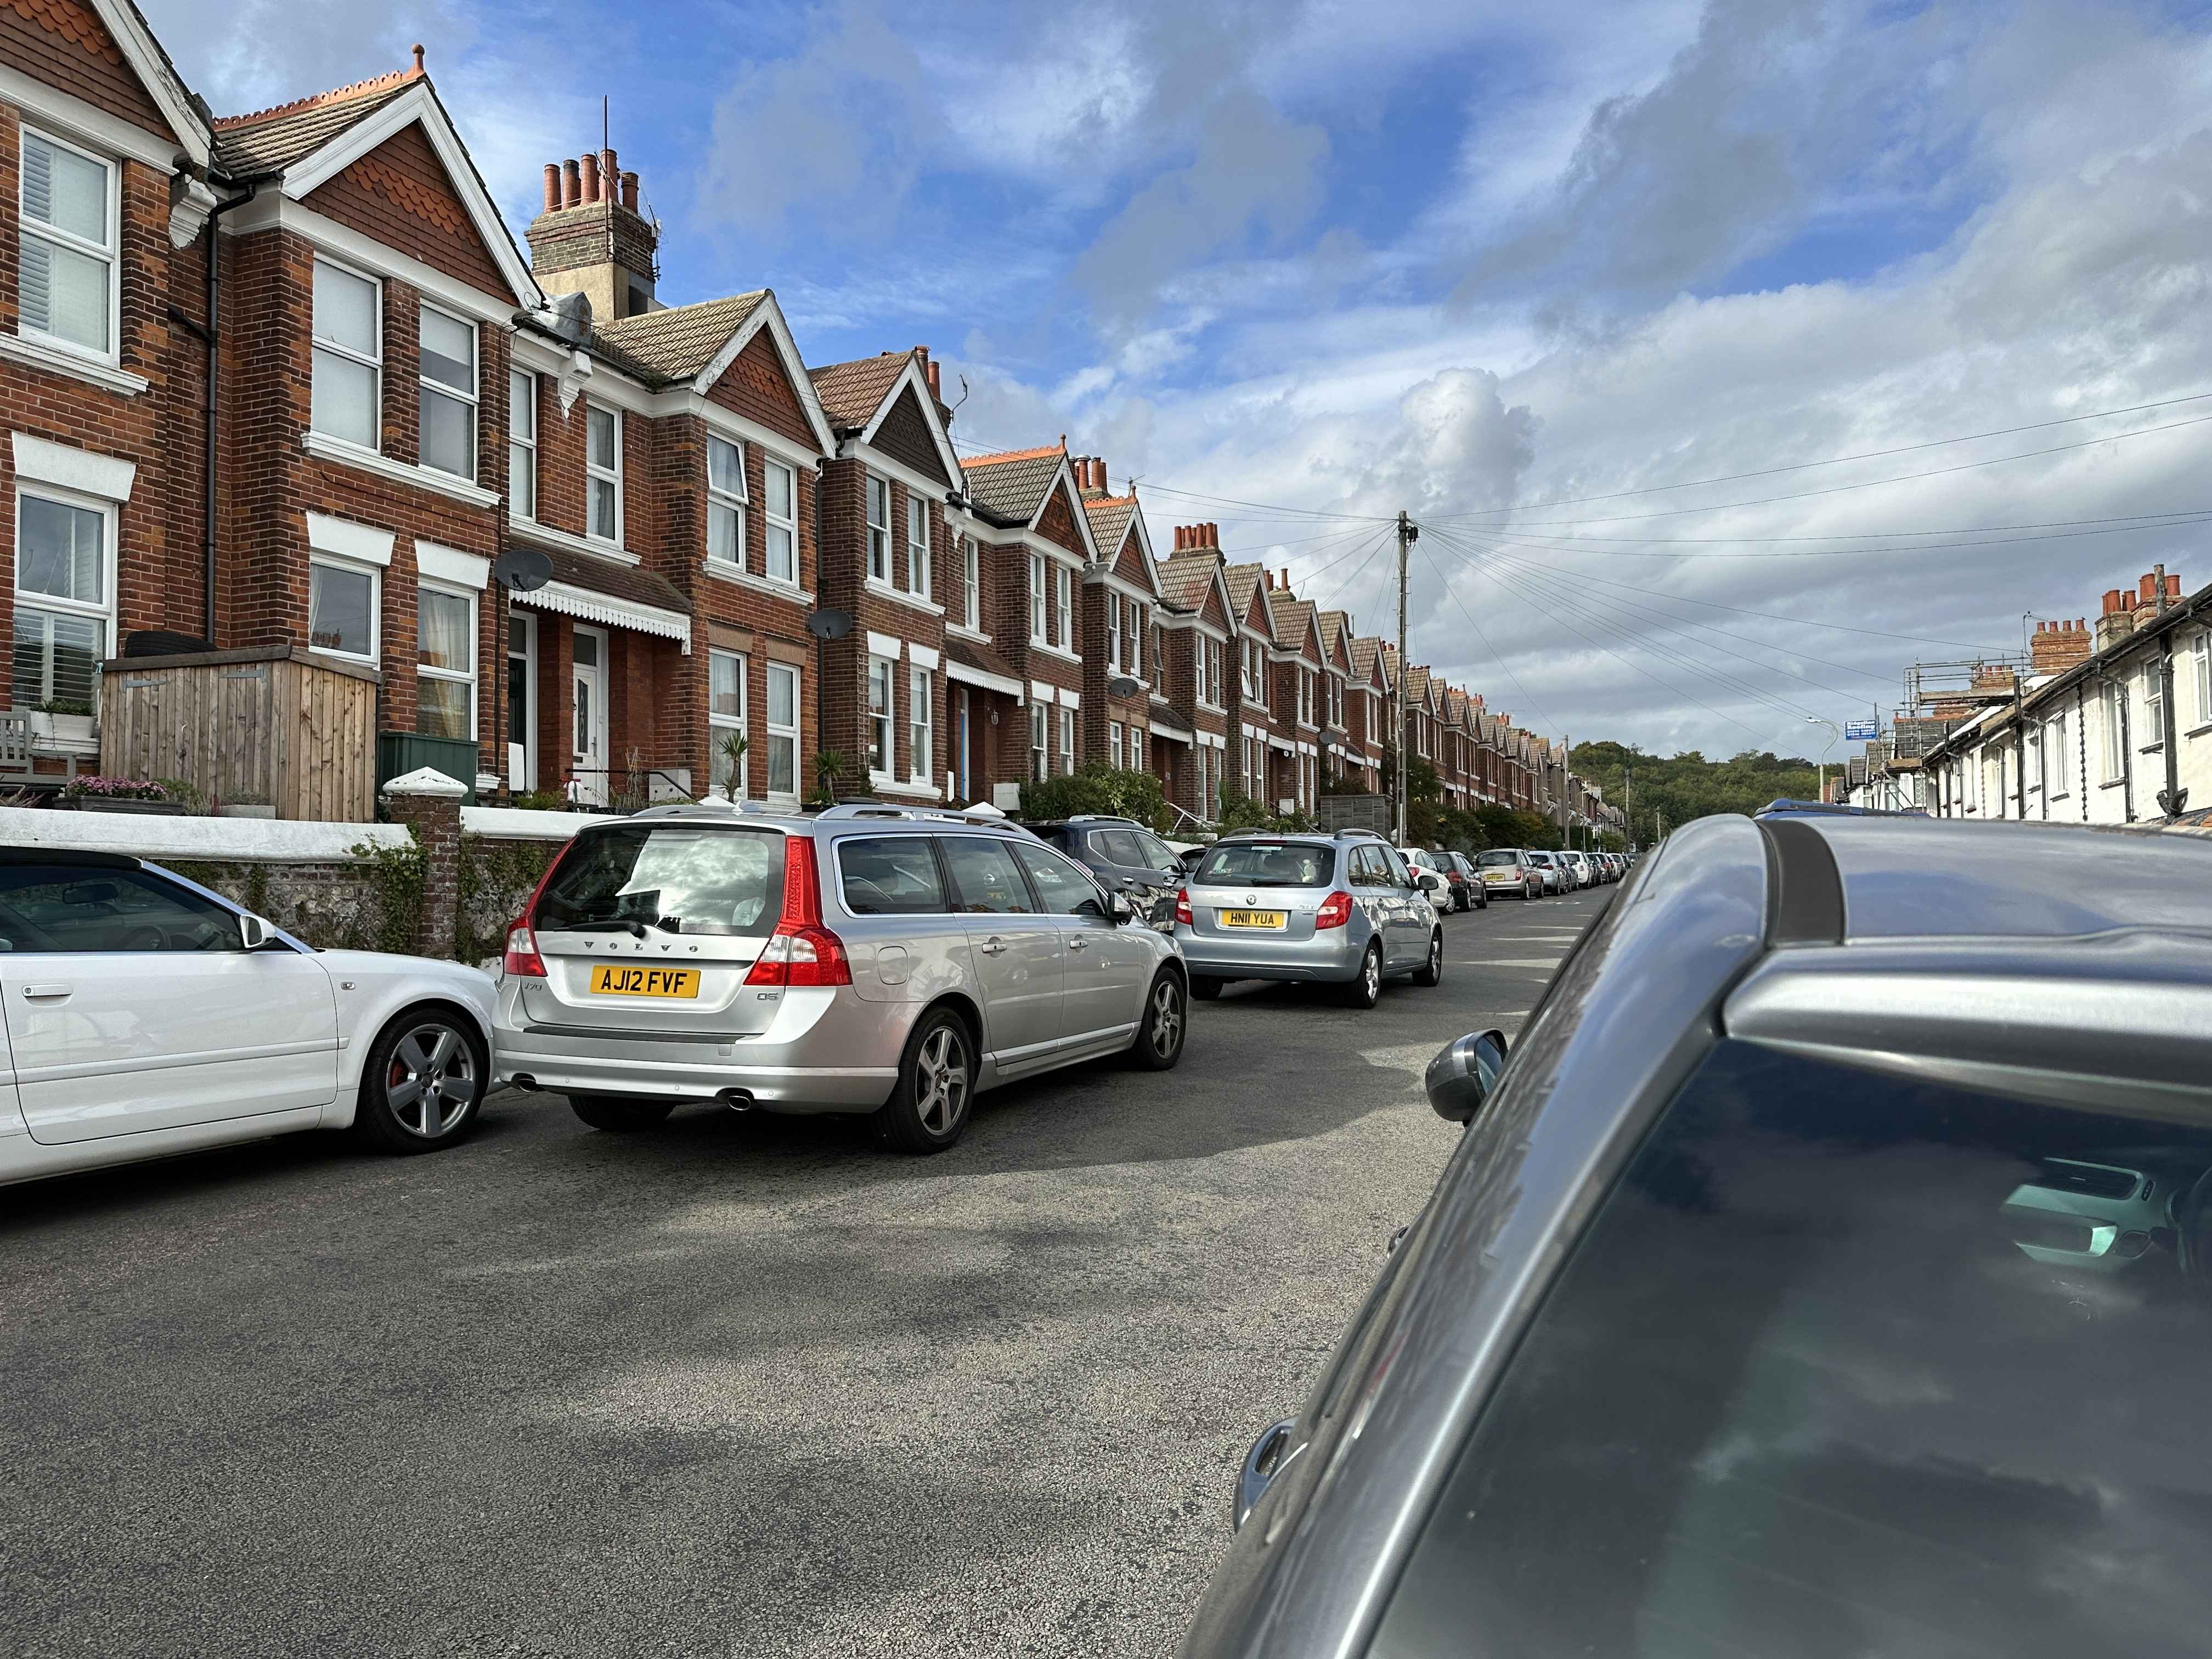 Photograph of AJ12 FVF - a Silver Volvo V70 parked in Hollingdean. The second of two photographs supplied by the residents of Hollingdean.